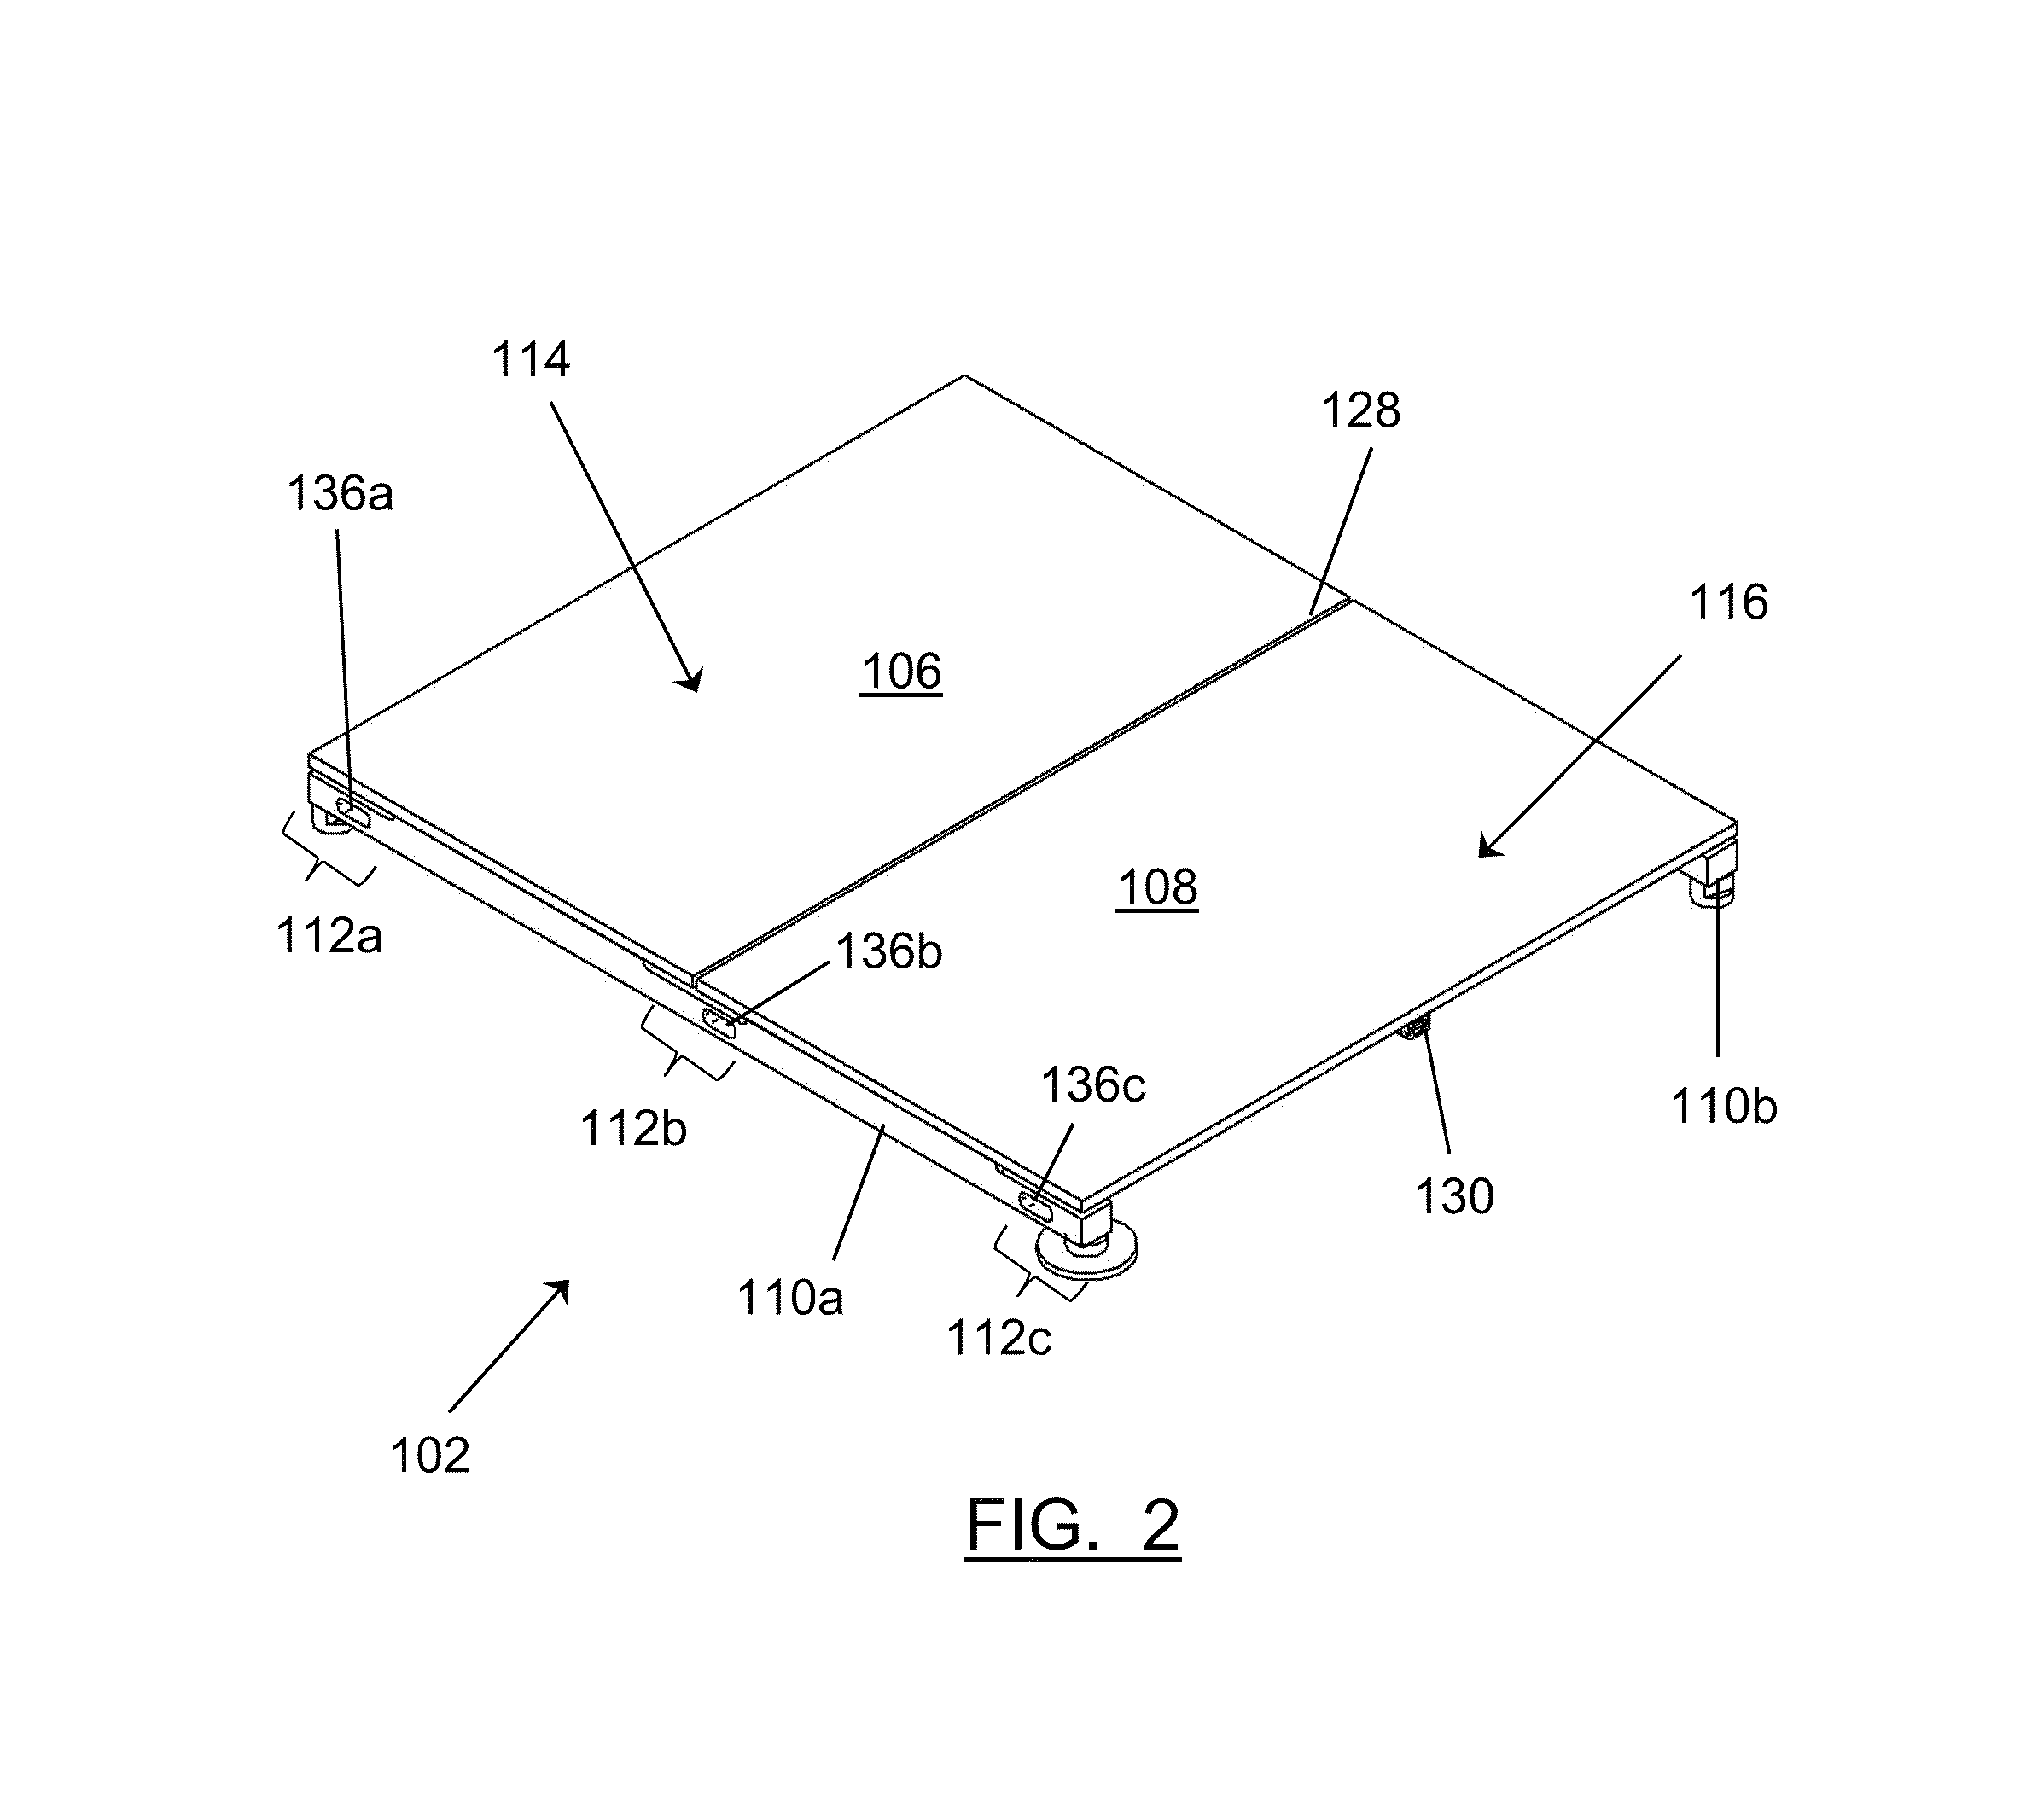 Force measurement system having a plurality of measurement surfaces